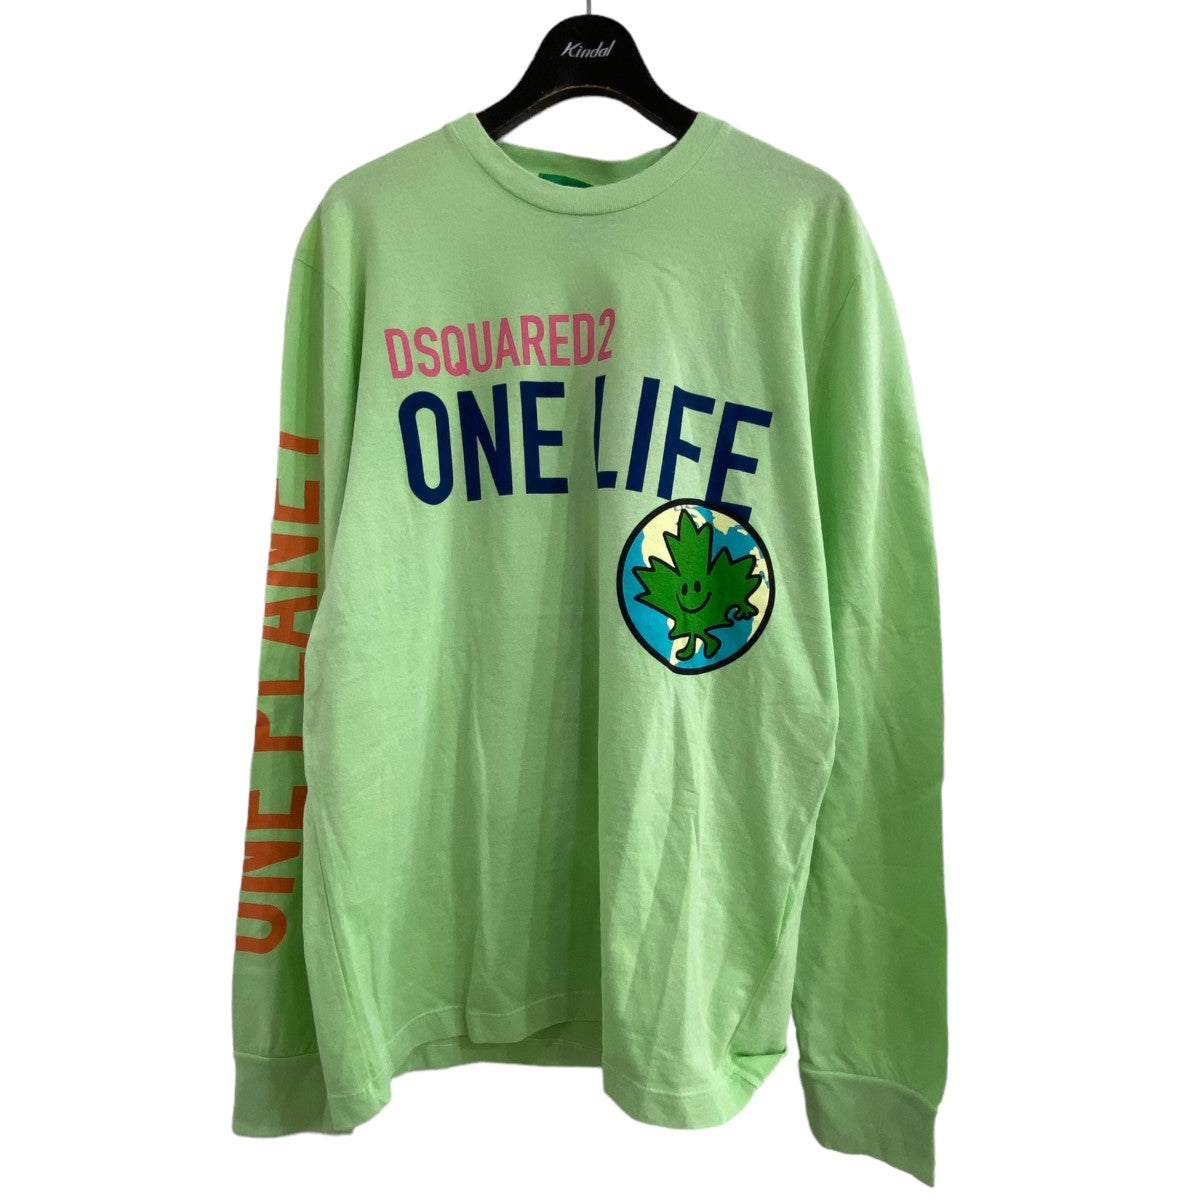 DSQUARED2(ディースクエアード) ONE LIFE ONE PLANET長袖Tシャツ ...